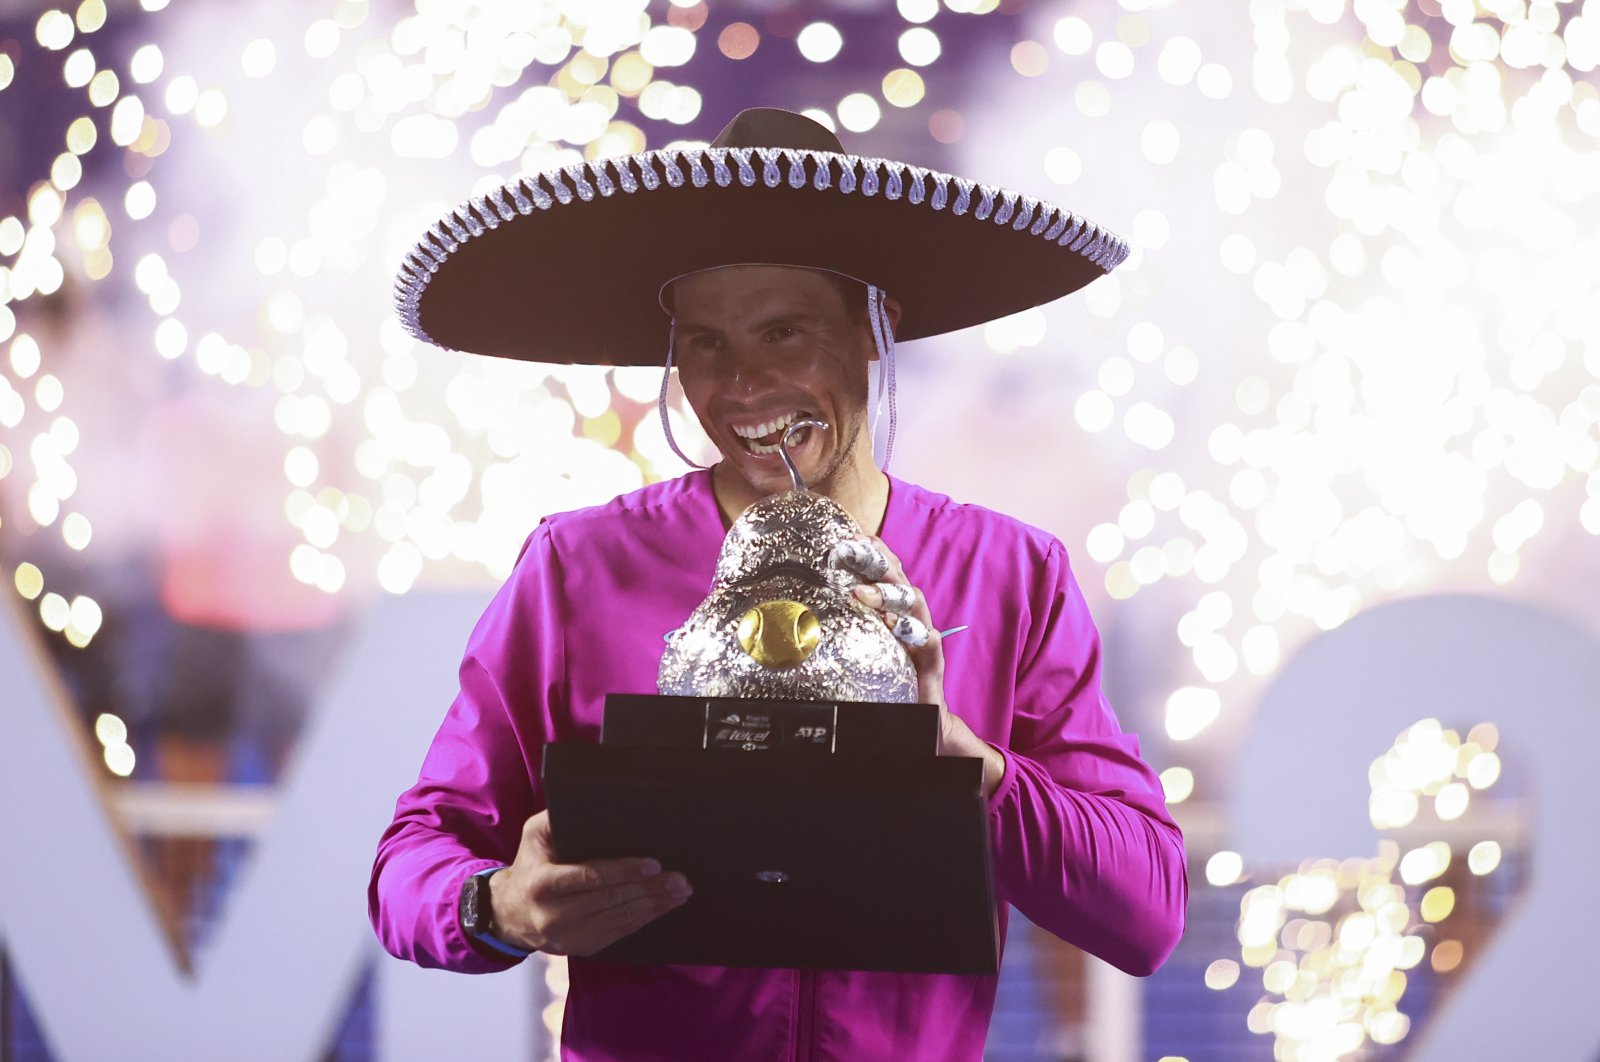 Rafael Nadal celebrates after winning the Mexican Open singles final, Acapulco, Mexico, Feb. 26, 2022. (EPA Photo)